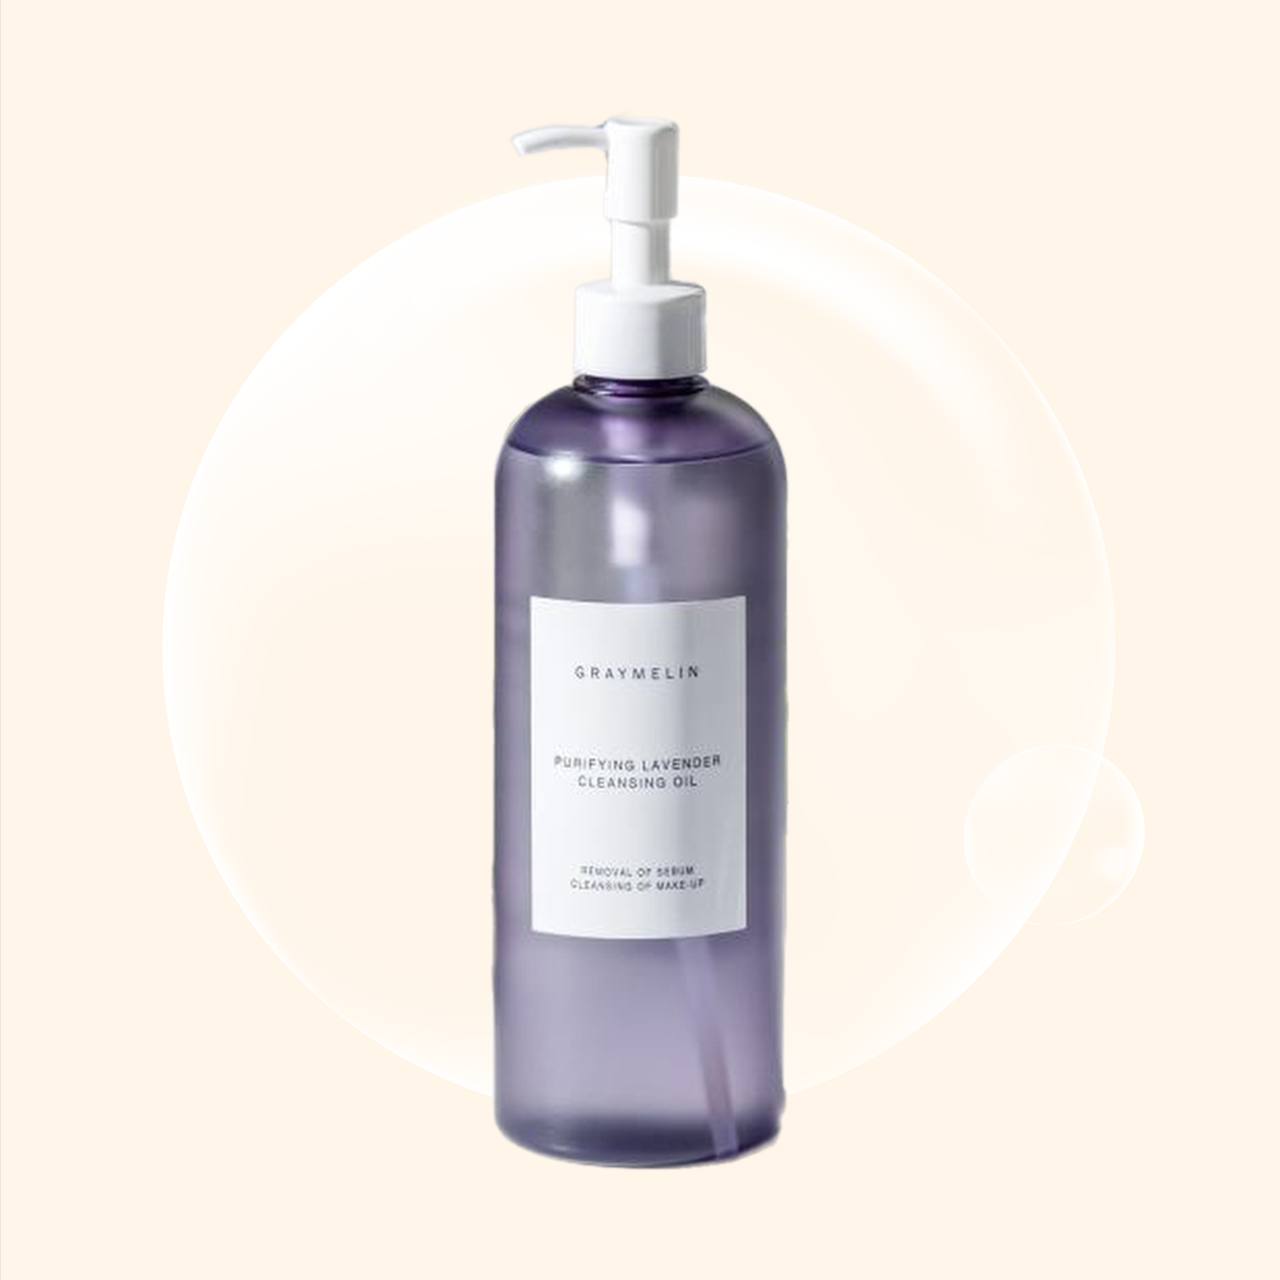 Graymelin Purifying Lavender Cleansing Oil 400 мл